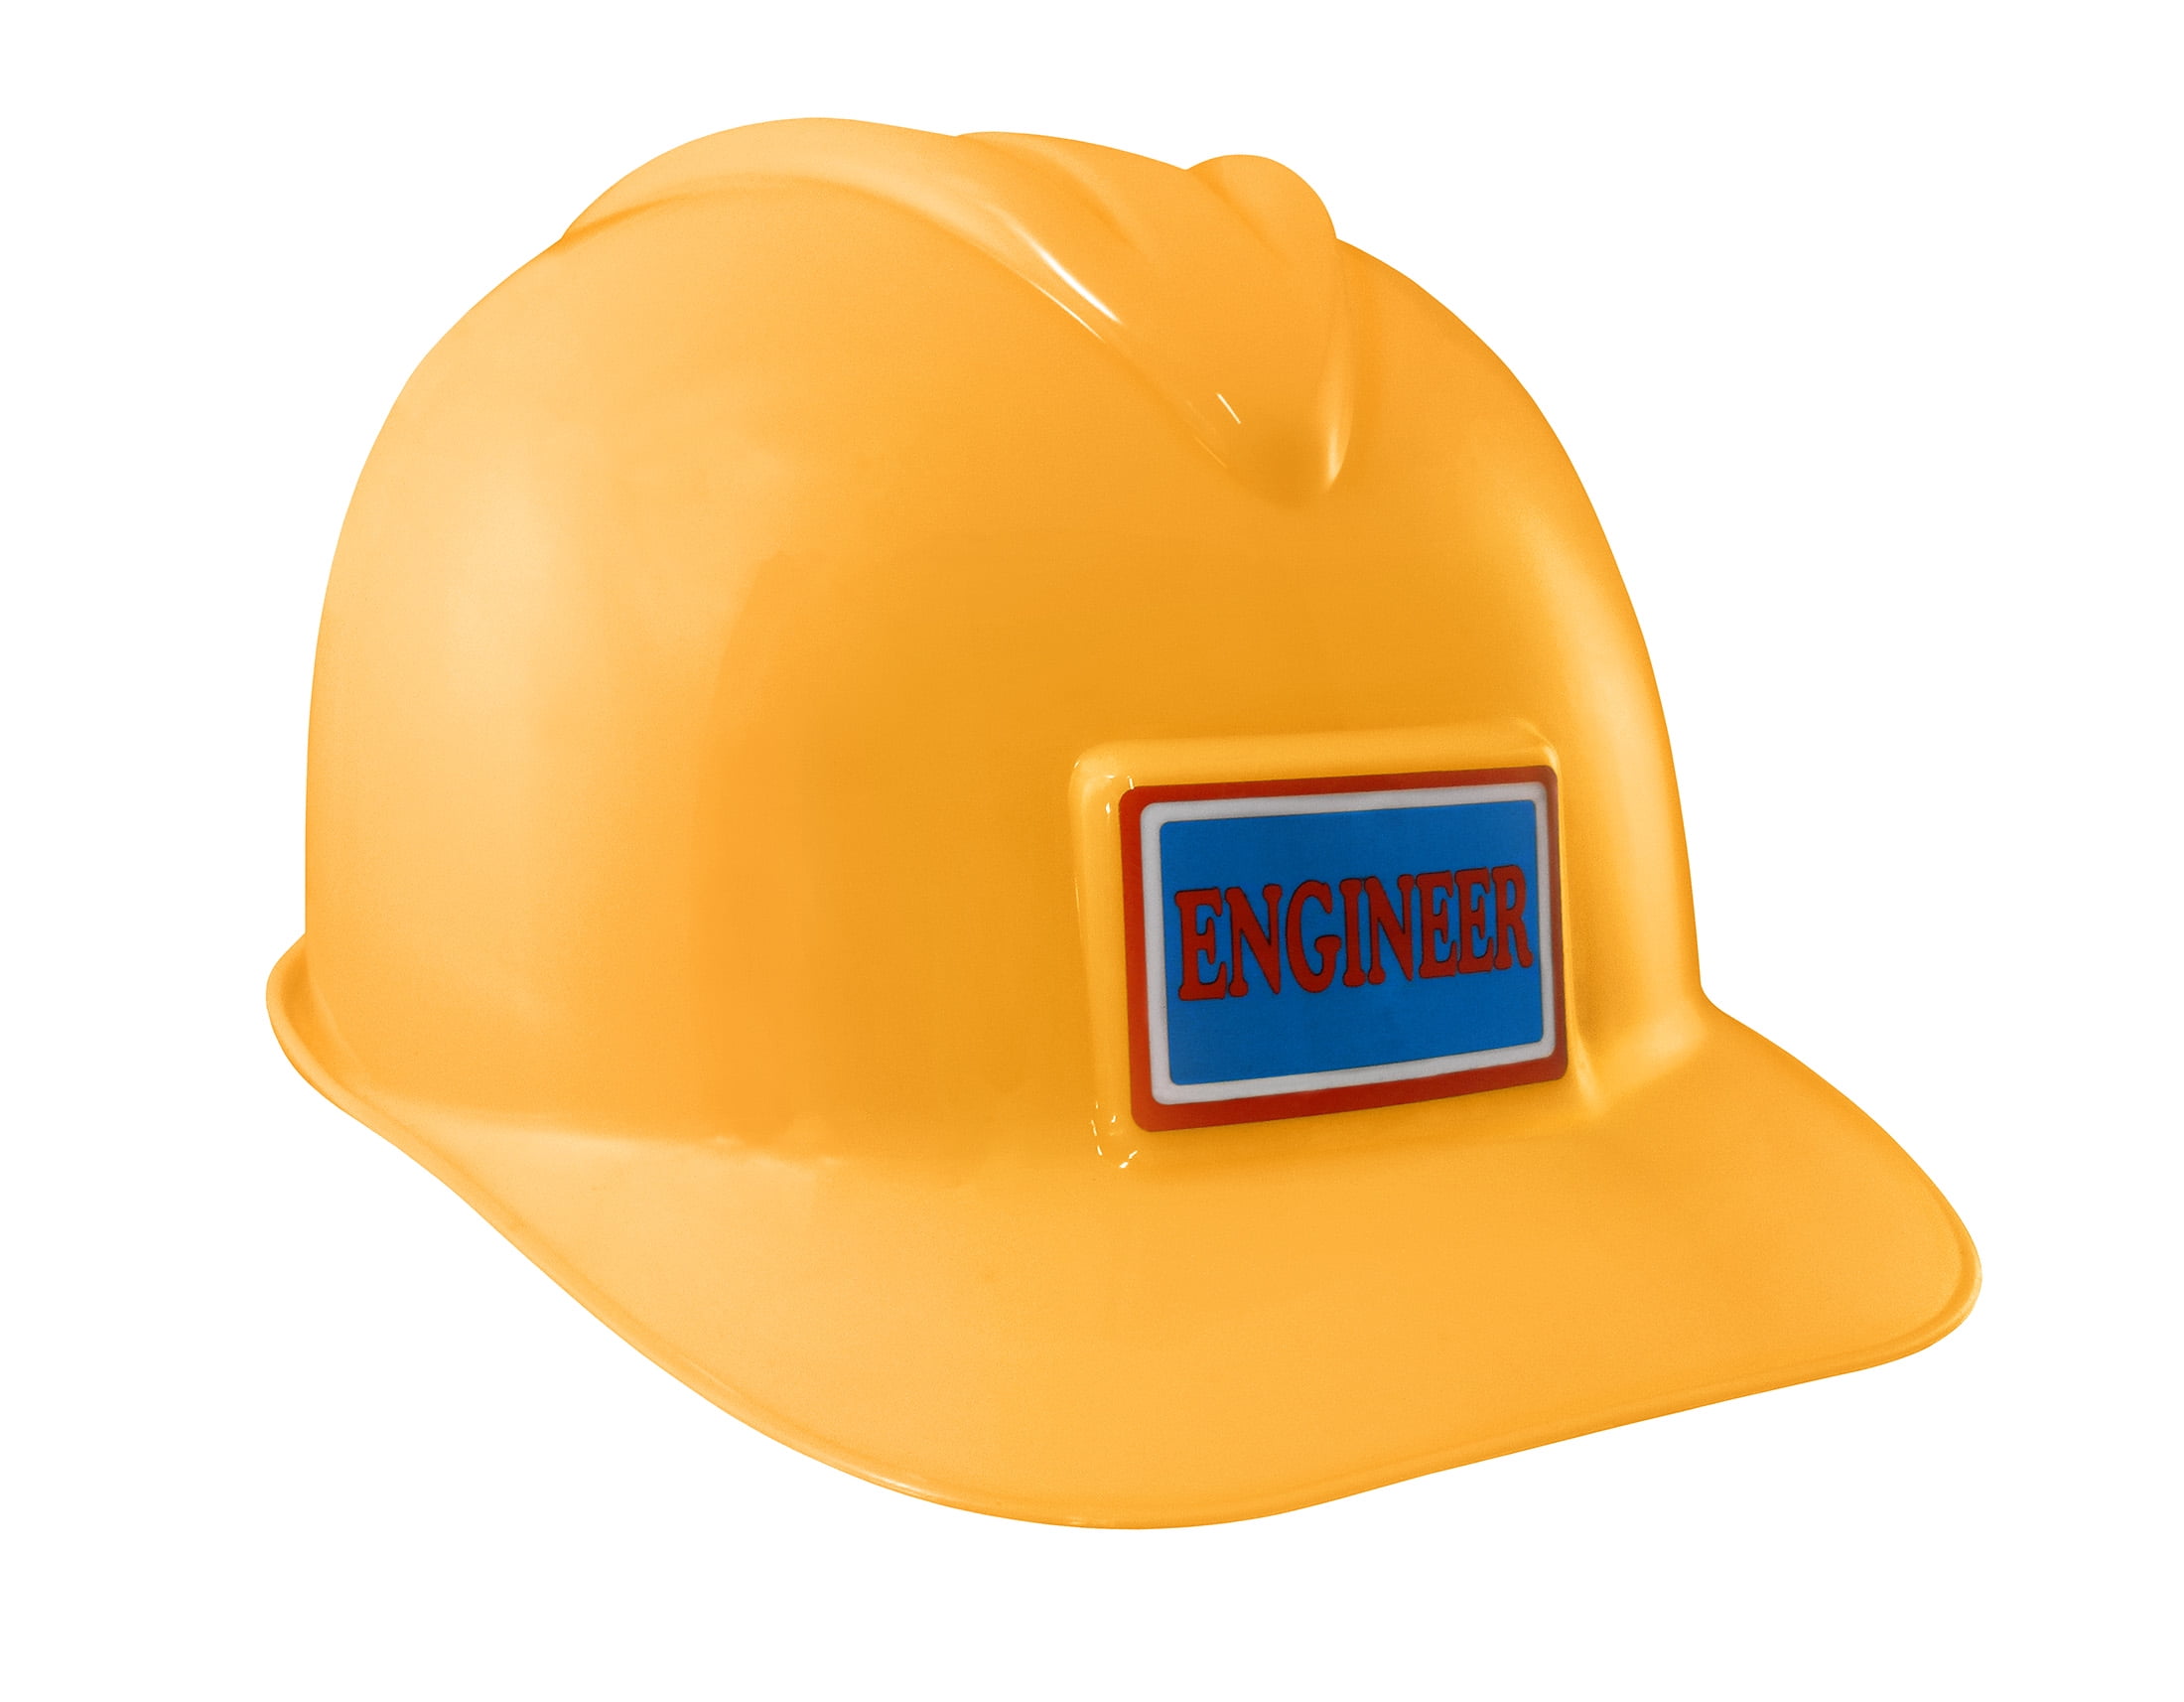 Kids Toy Hard Hat Play Builders Construction Workes Yellow Hats One Size Helmet 